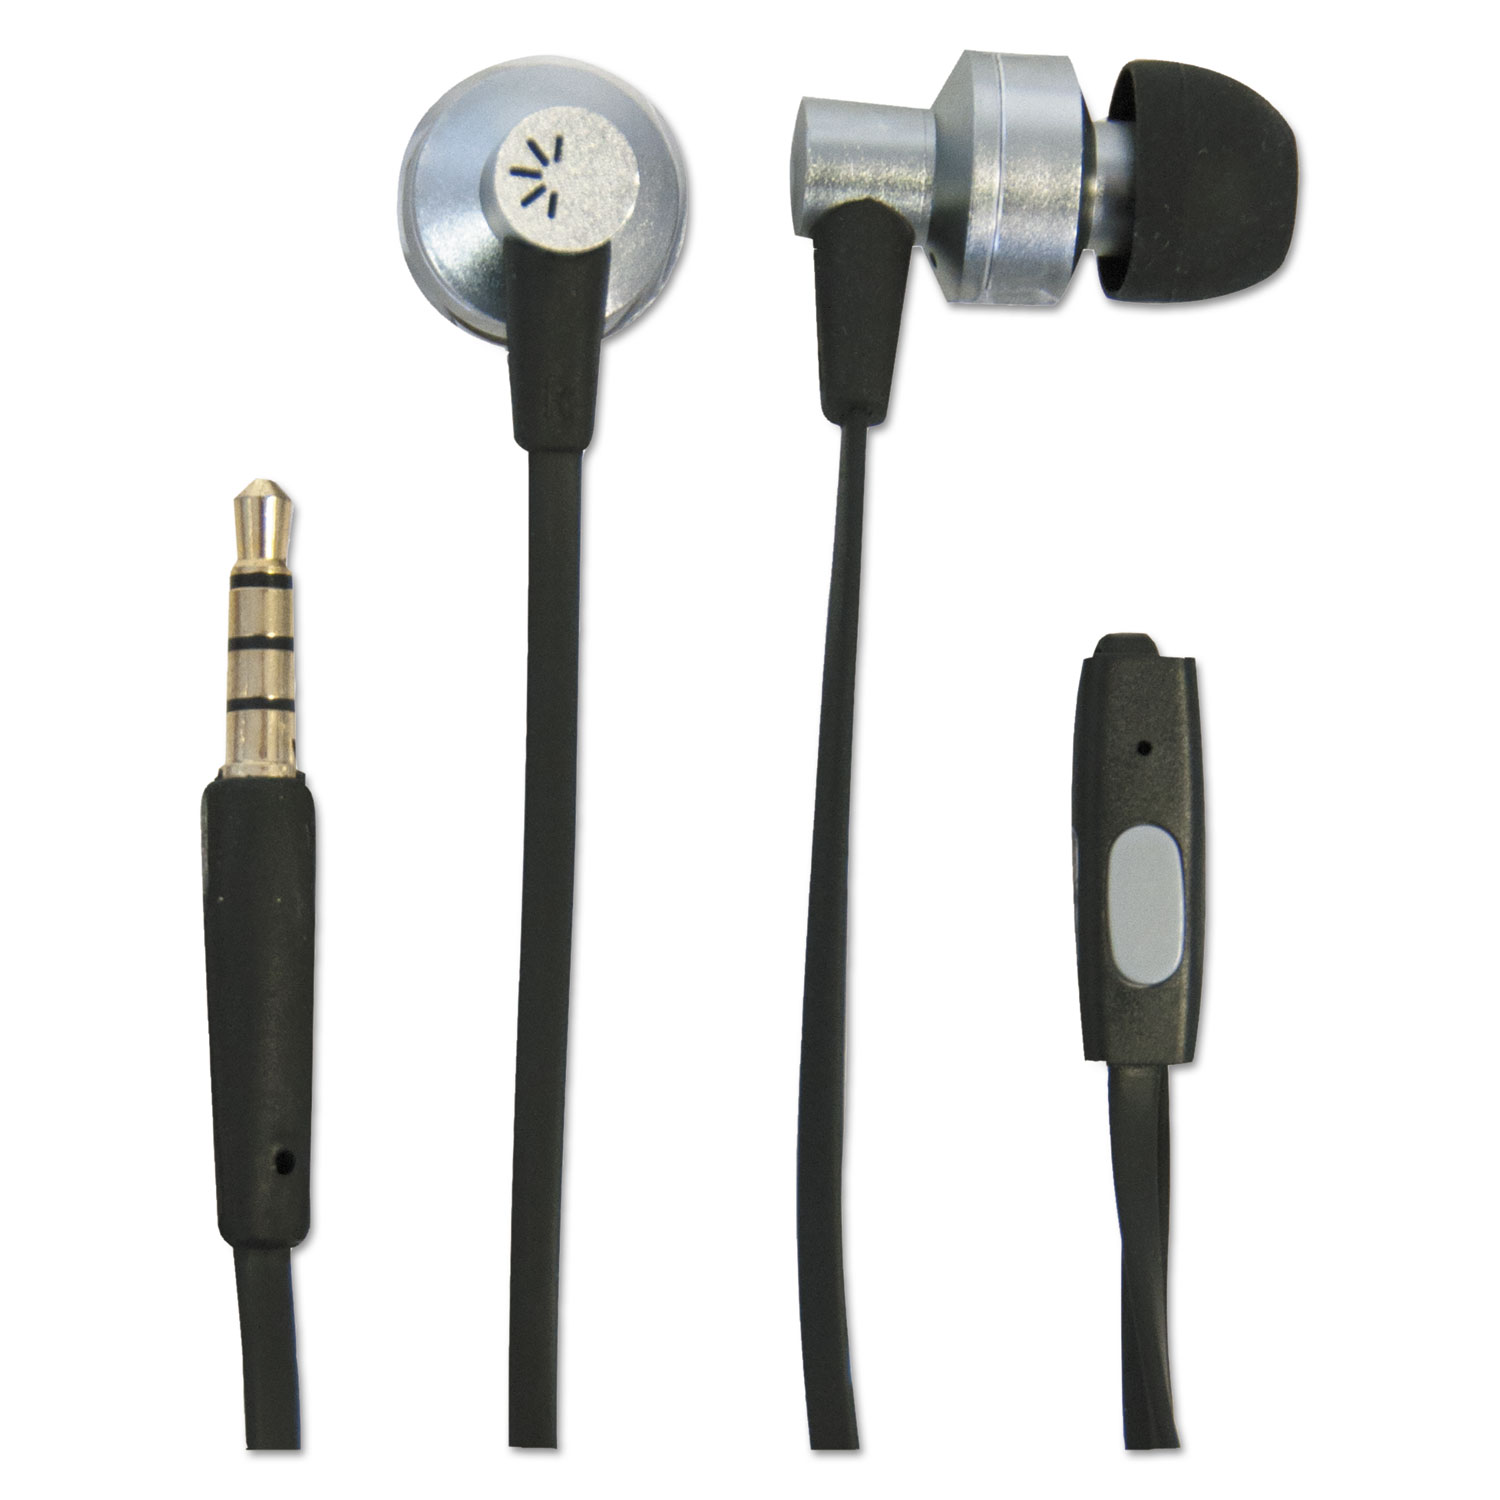 Case Logic BTHCLSTHD400  400 Earset - Stereo - Black, Silver - Wired - Earbud - Binaural - In-Ear - 4 Ft Cable CLSTHD400